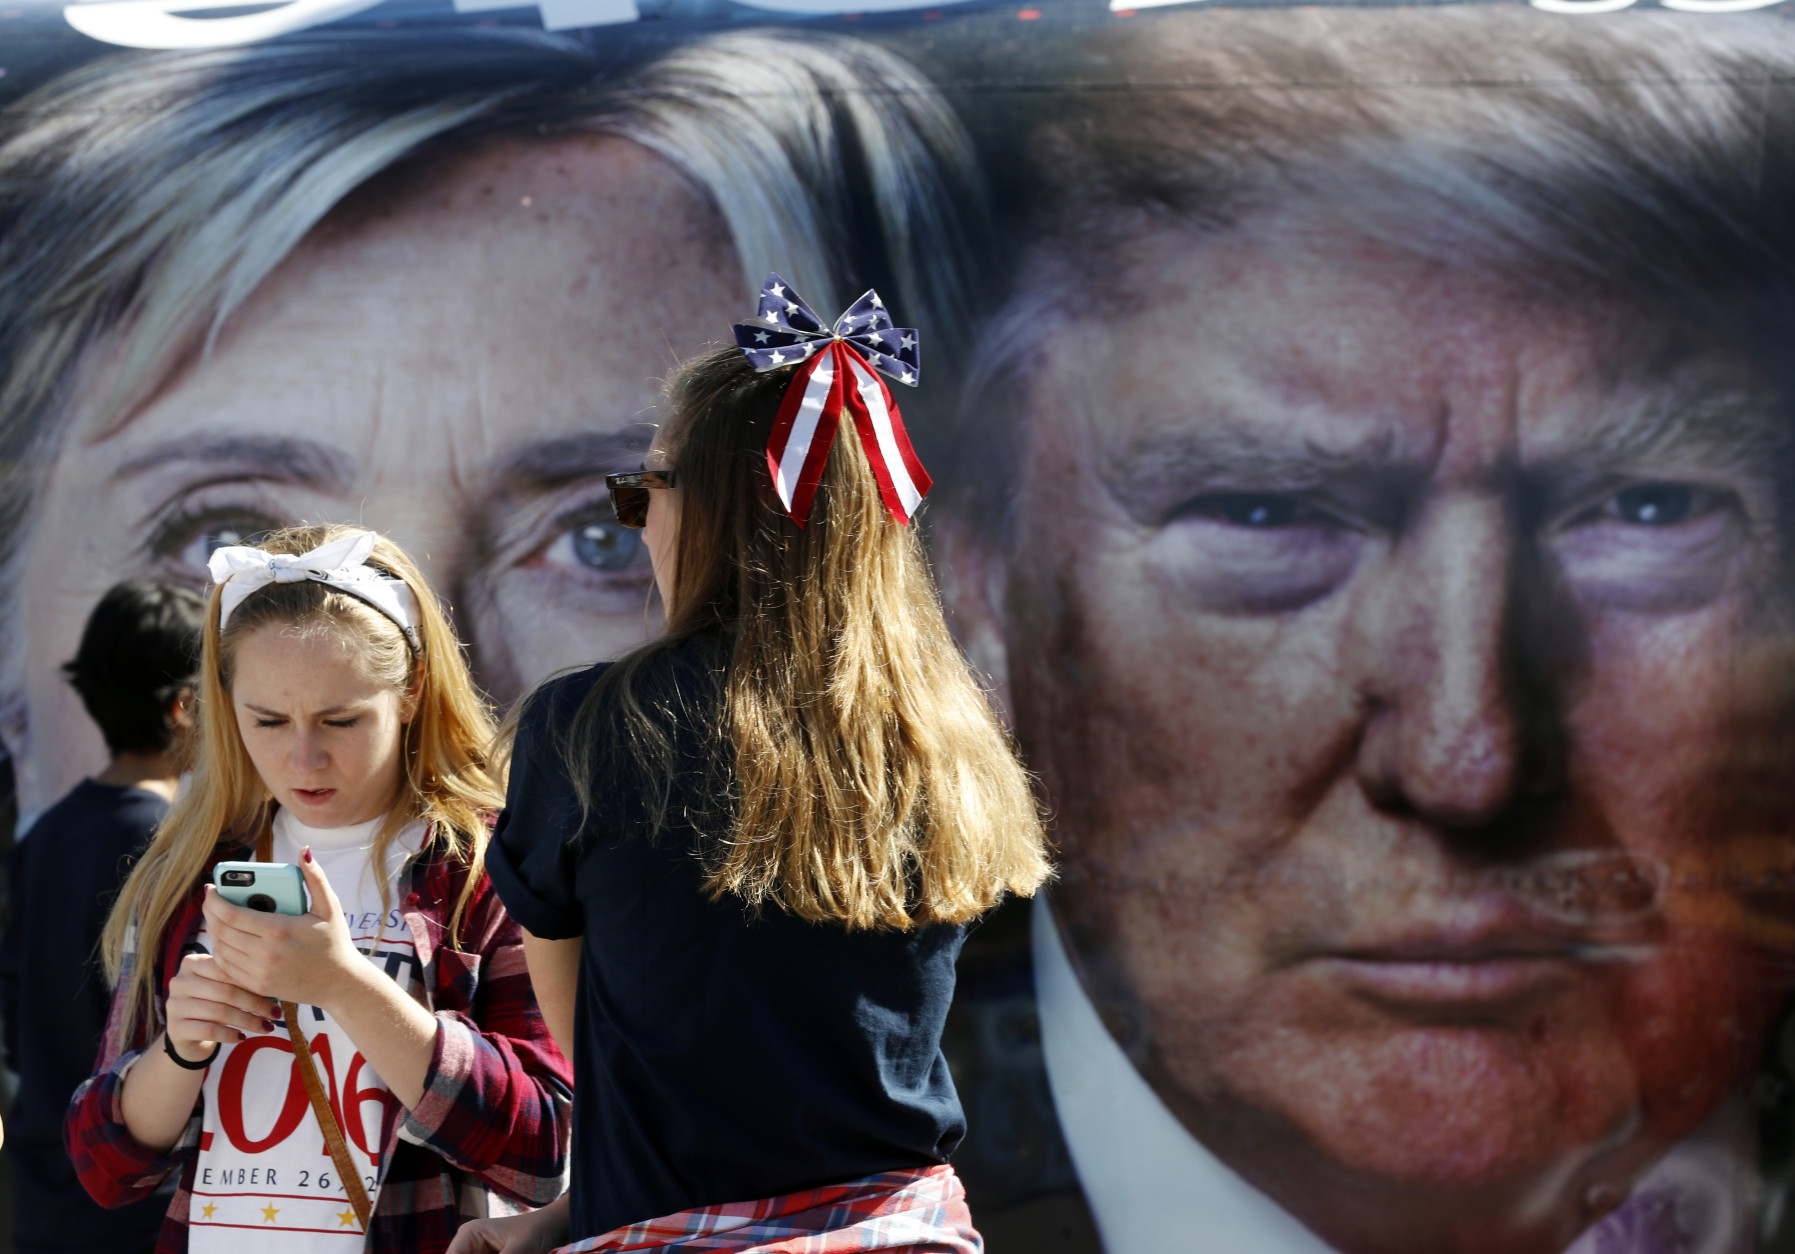 People pause near a bus adorned with large photos of candidates Hillary Clinton and Donald Trump before the presidential debate at Hofstra University in Hempstead, N.Y., Monday, Sept. 26, 2016. (AP Photo/Mary Altaffer)